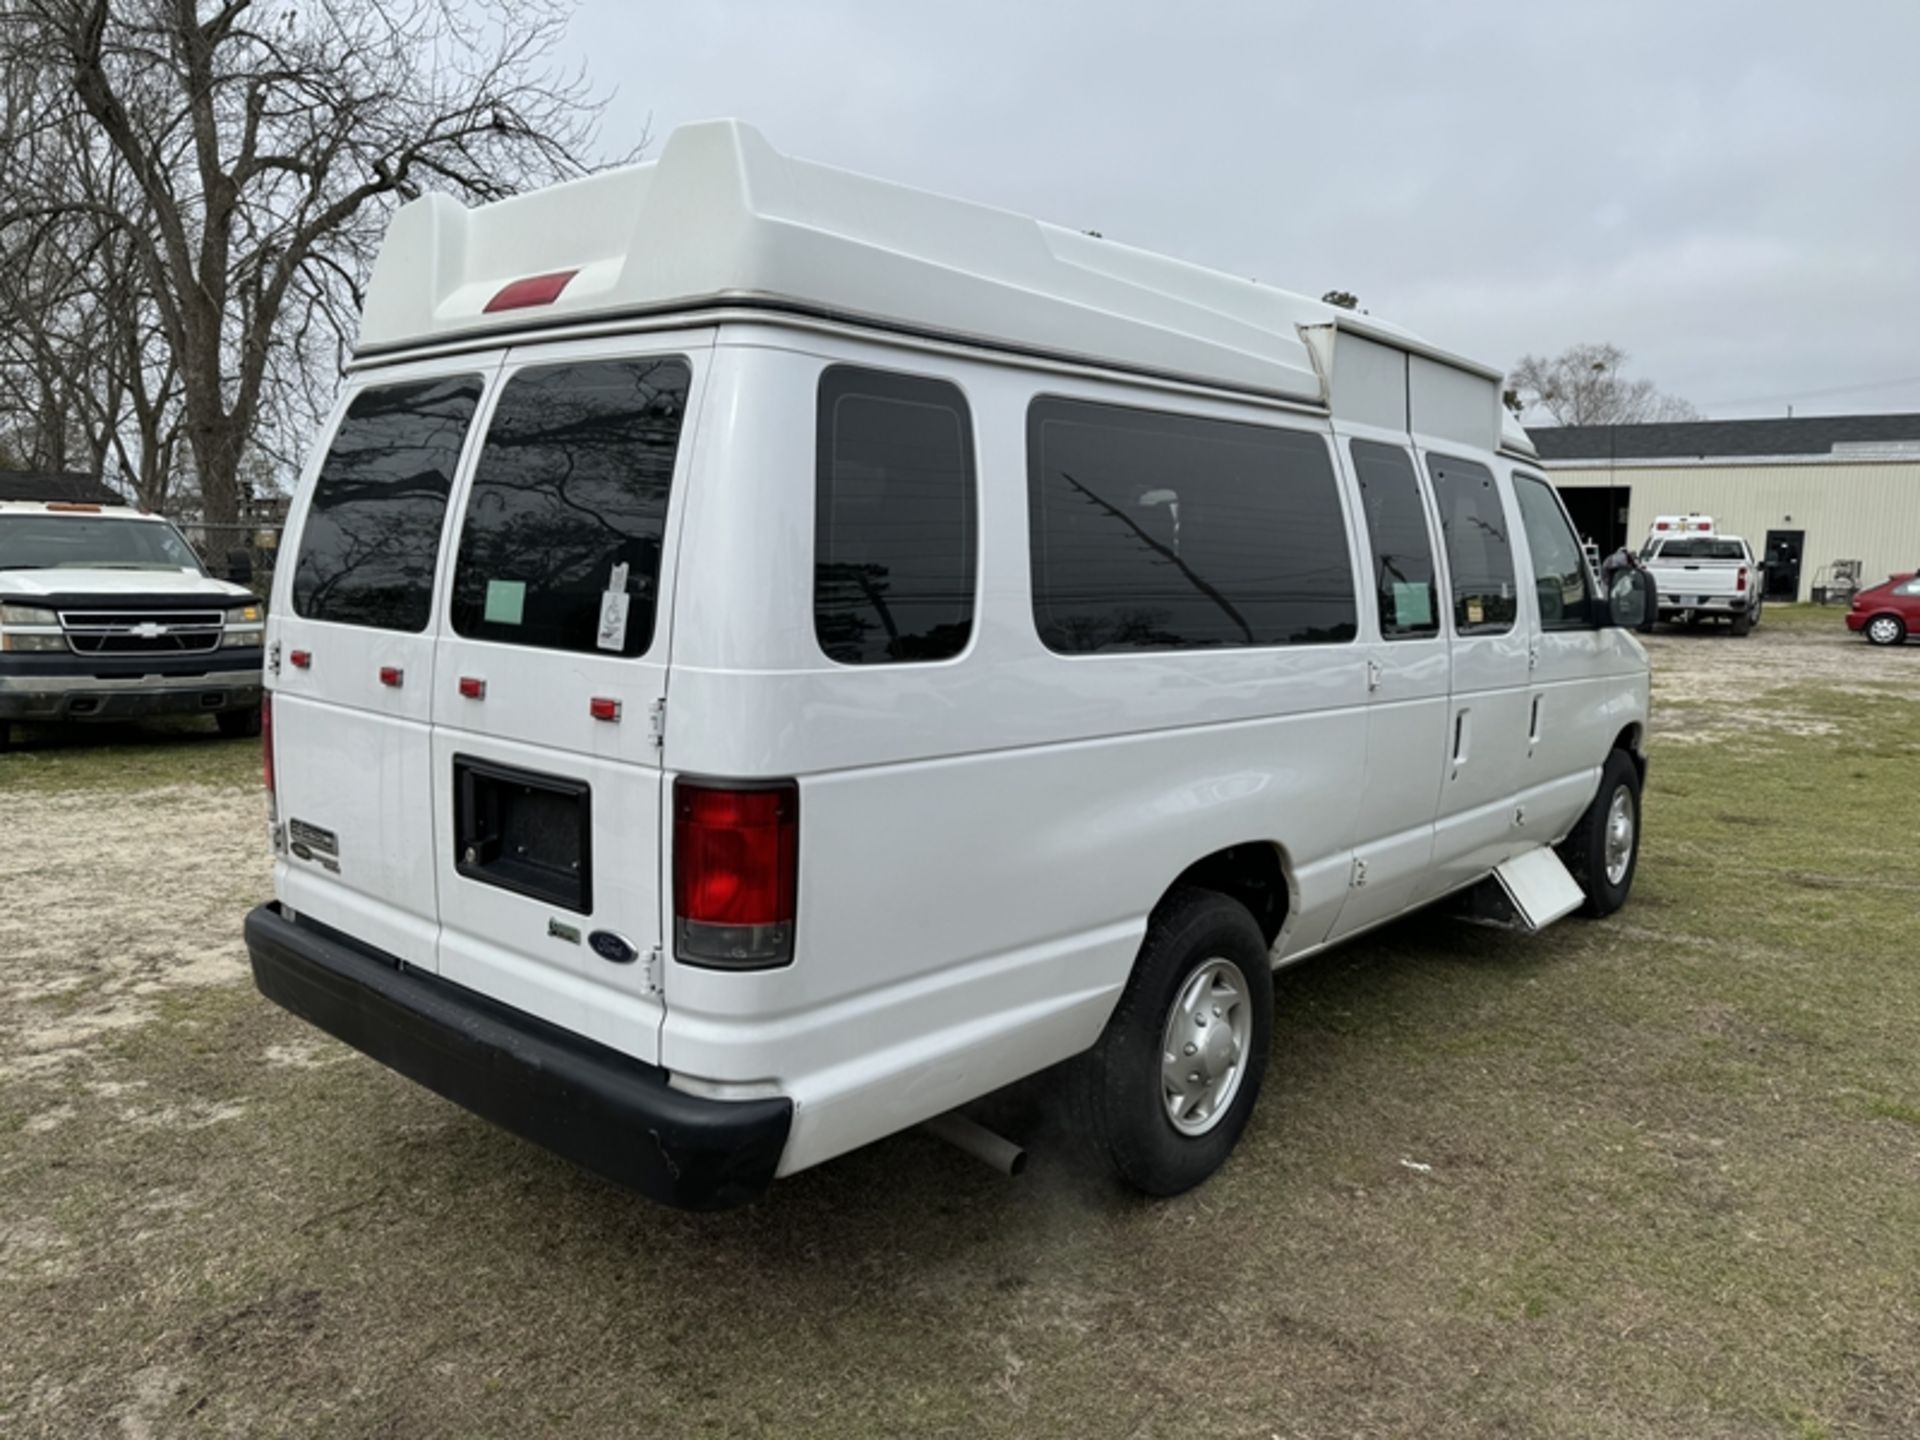 2013 FORD E-250 wheelchair van - 93,207 miles showing - 1FTNS2EW0DDB04057 - Image 2 of 6